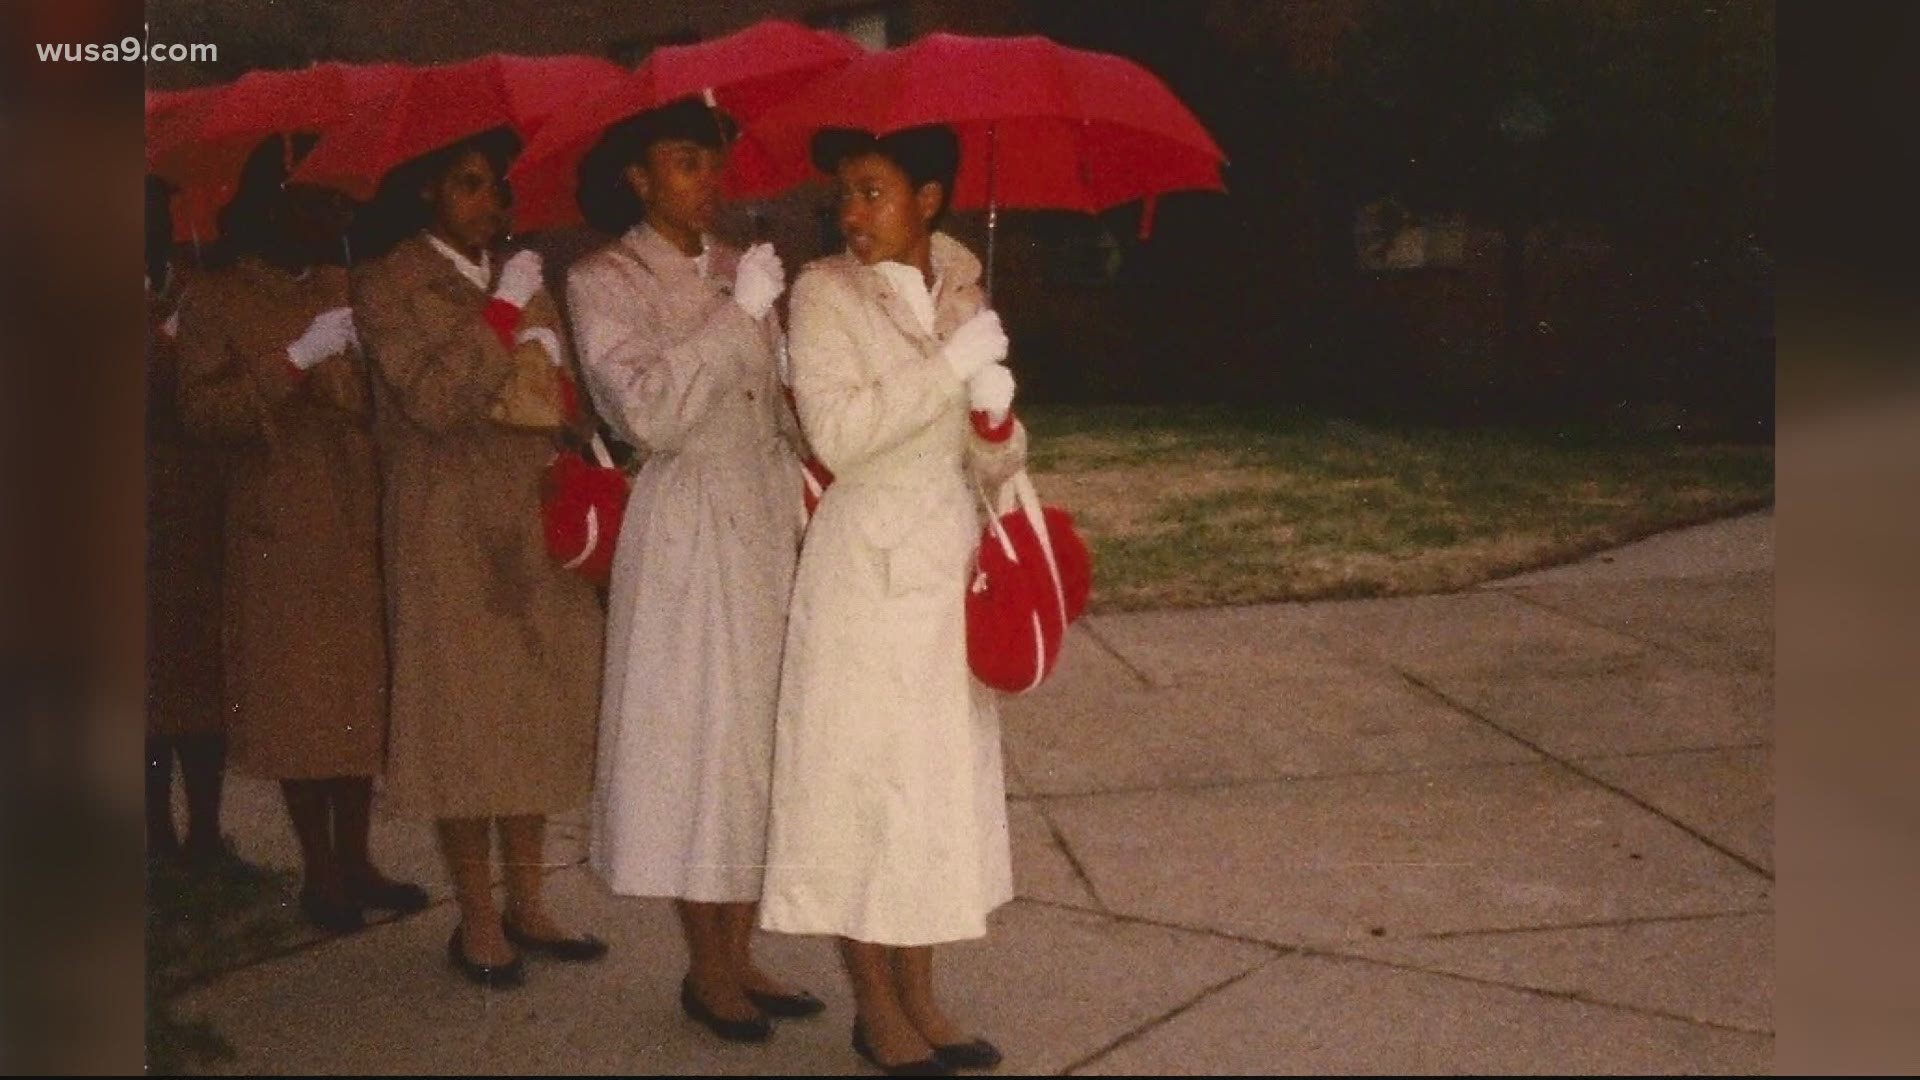 Happy Founder's Day Delta Sigma Theta! Get Uplifted